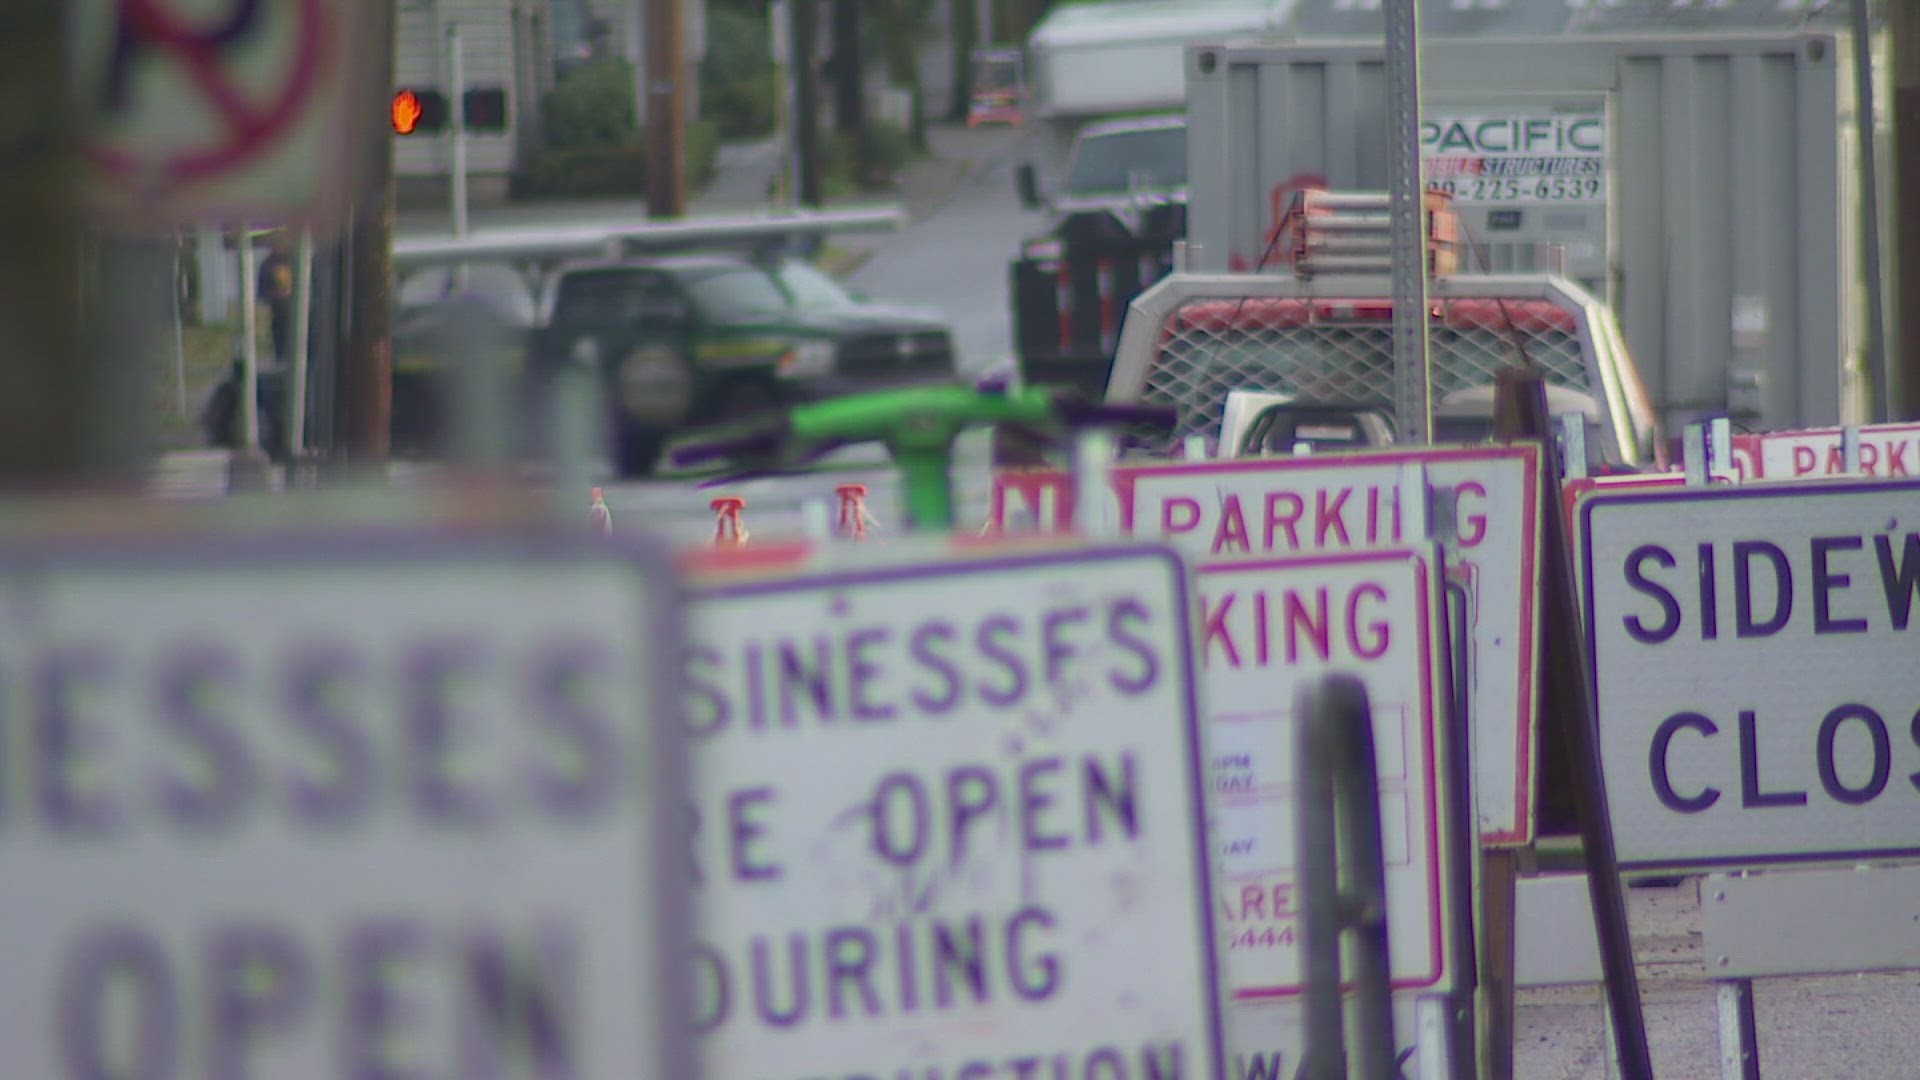 The Madison Rapid Ride G line project has been ongoing for two years. Businesses in the Madison Park neighborhood are fed up with the constant disruptions.